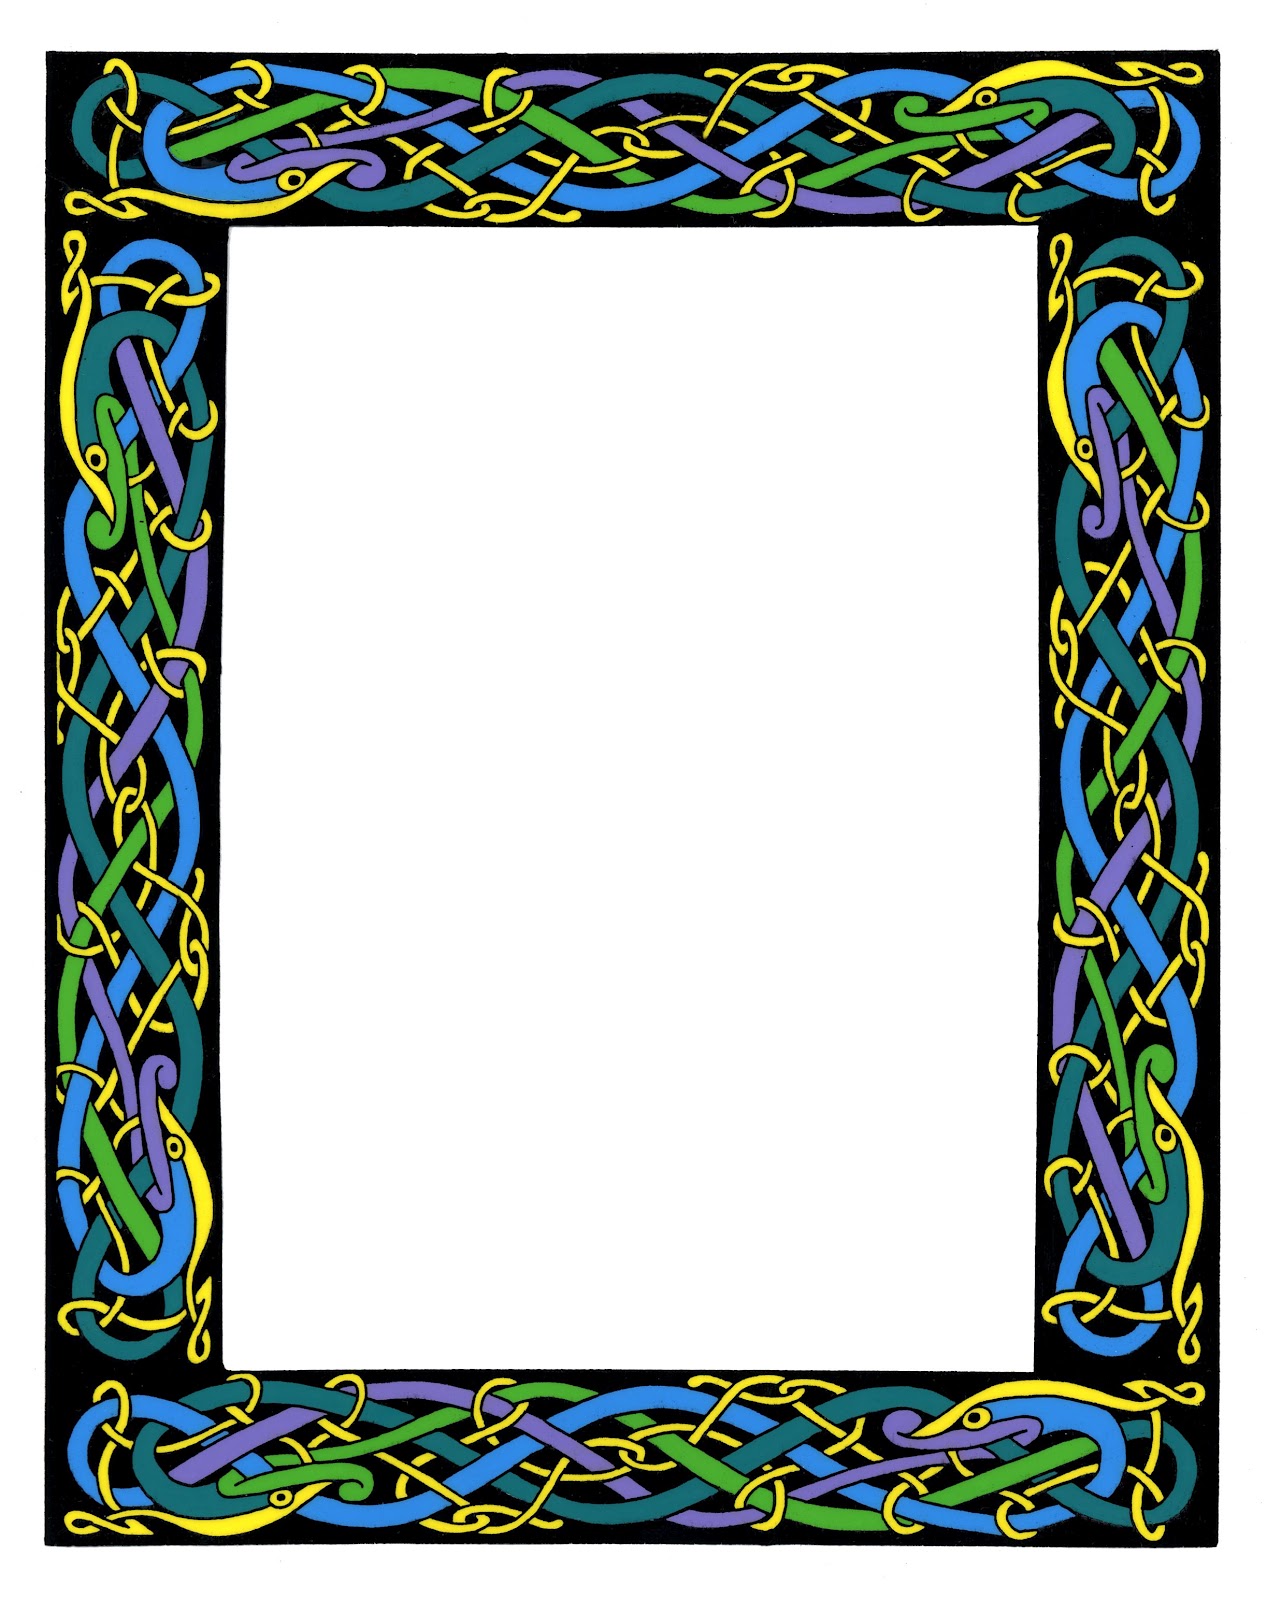 free library clipart borders - photo #38